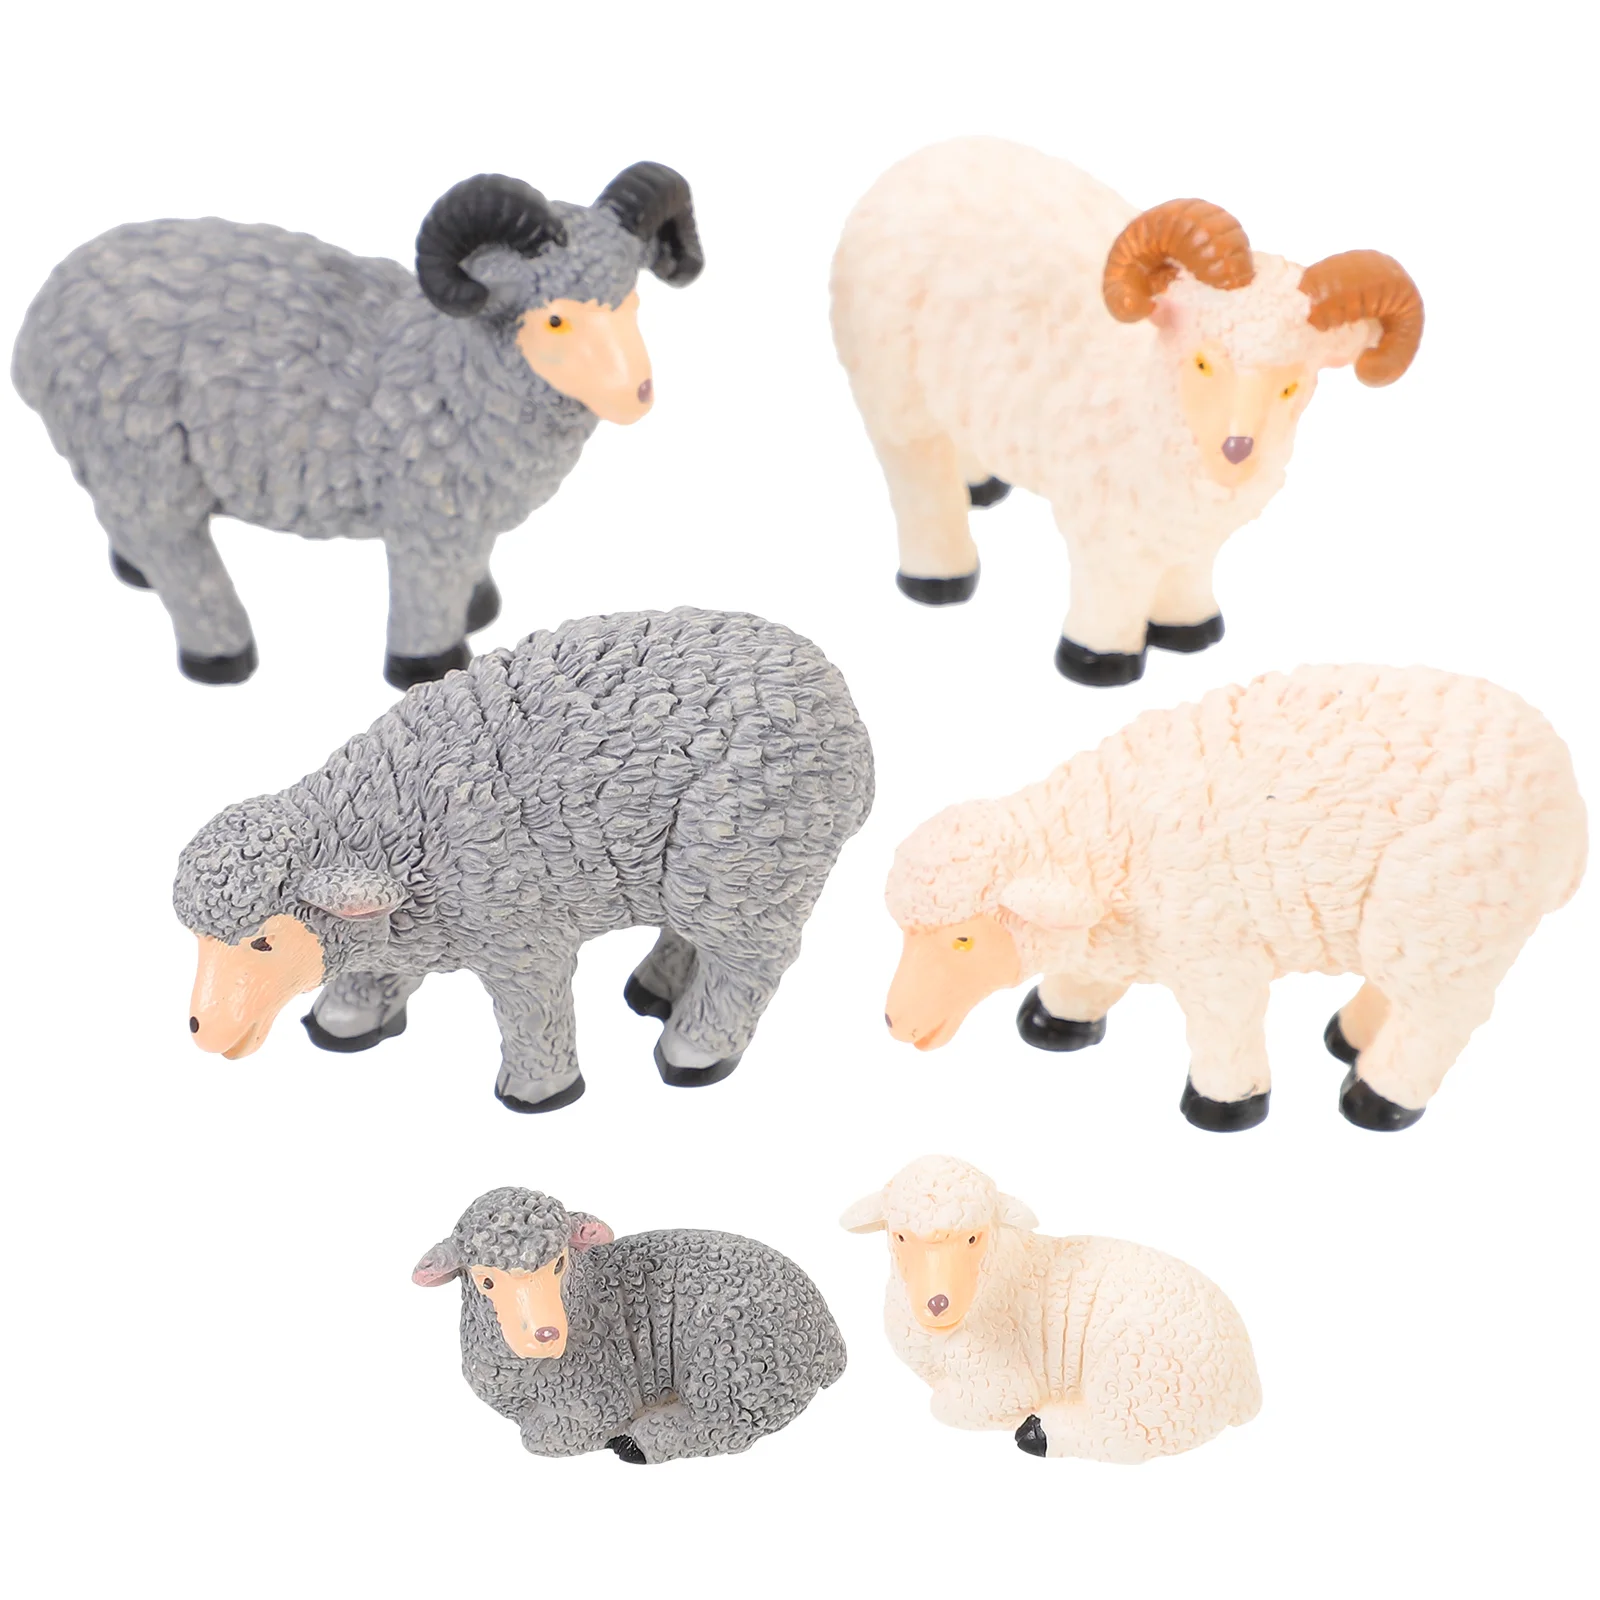 

6 Pcs Home Decor Sheep Statues Small Goat Resin Tabletop Animal Figurine Decorations Office Miniature